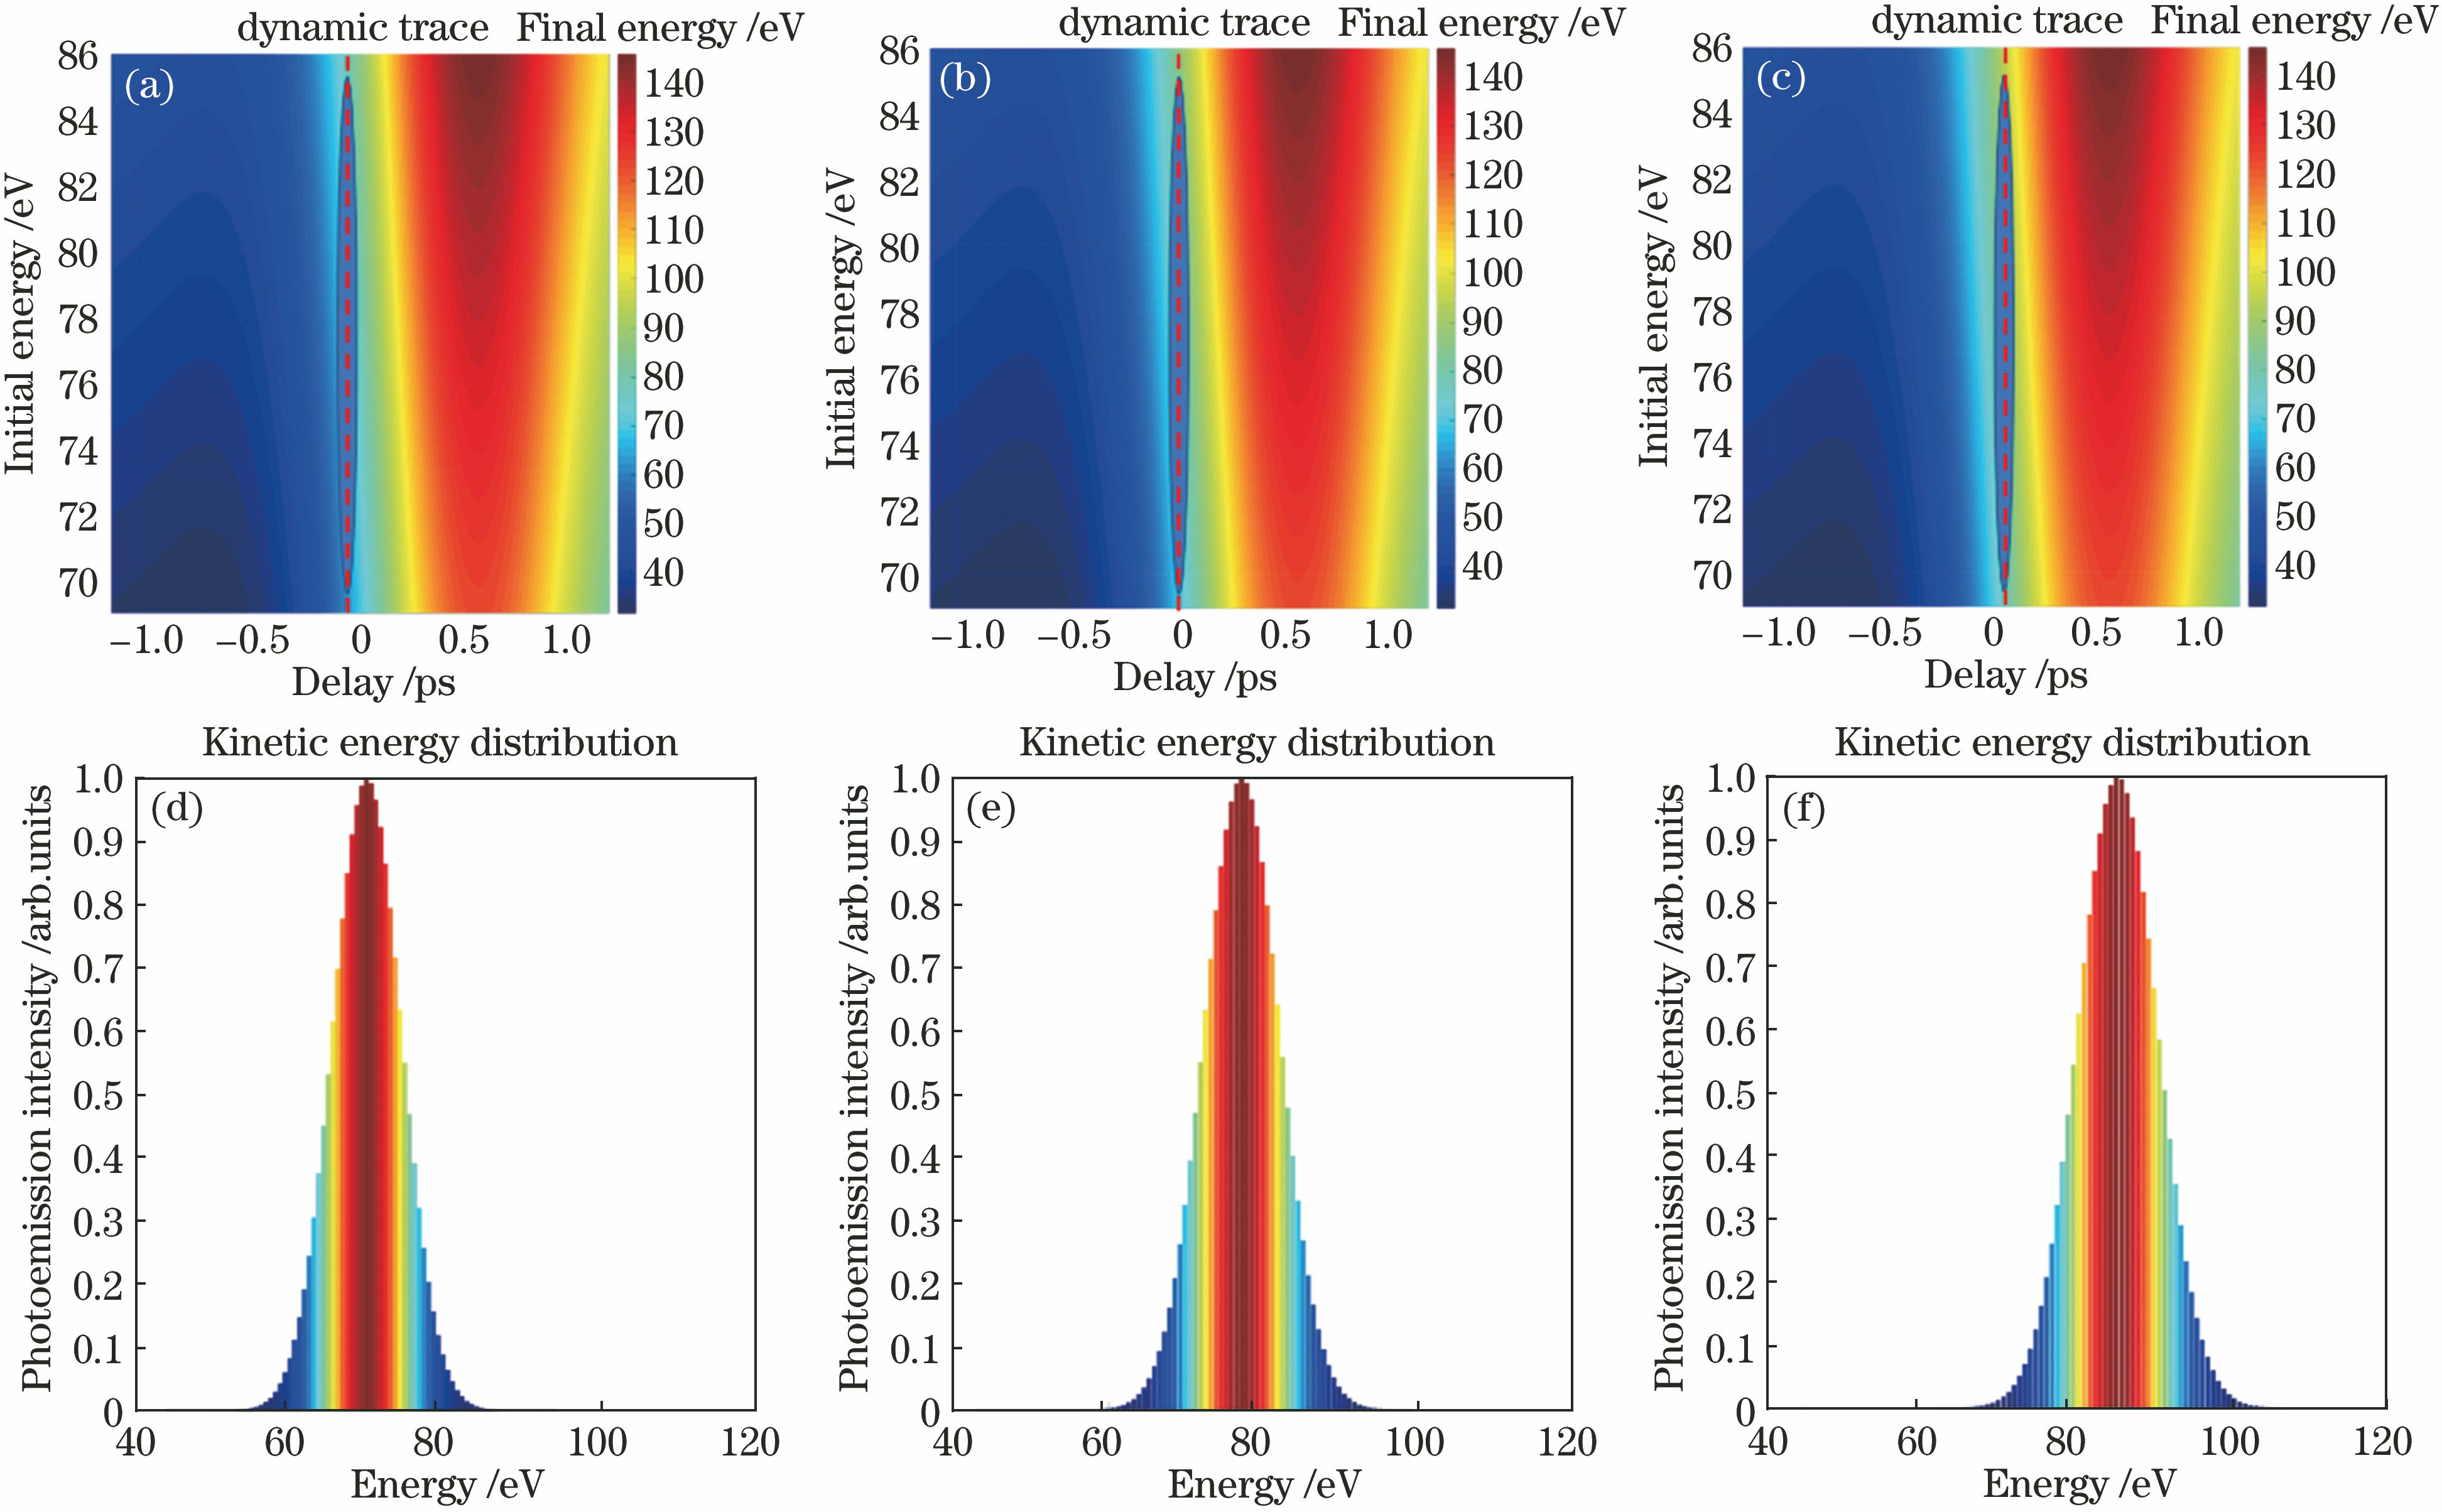 Simulation results with delays of -60 fs, 0 fs, and 60 fs. (a)-(c) Correlation in-between the terahertz streaked photoelectron final energy and initial energy at different time delays; (d)-(f) photoelectron final energy spectrum distribution